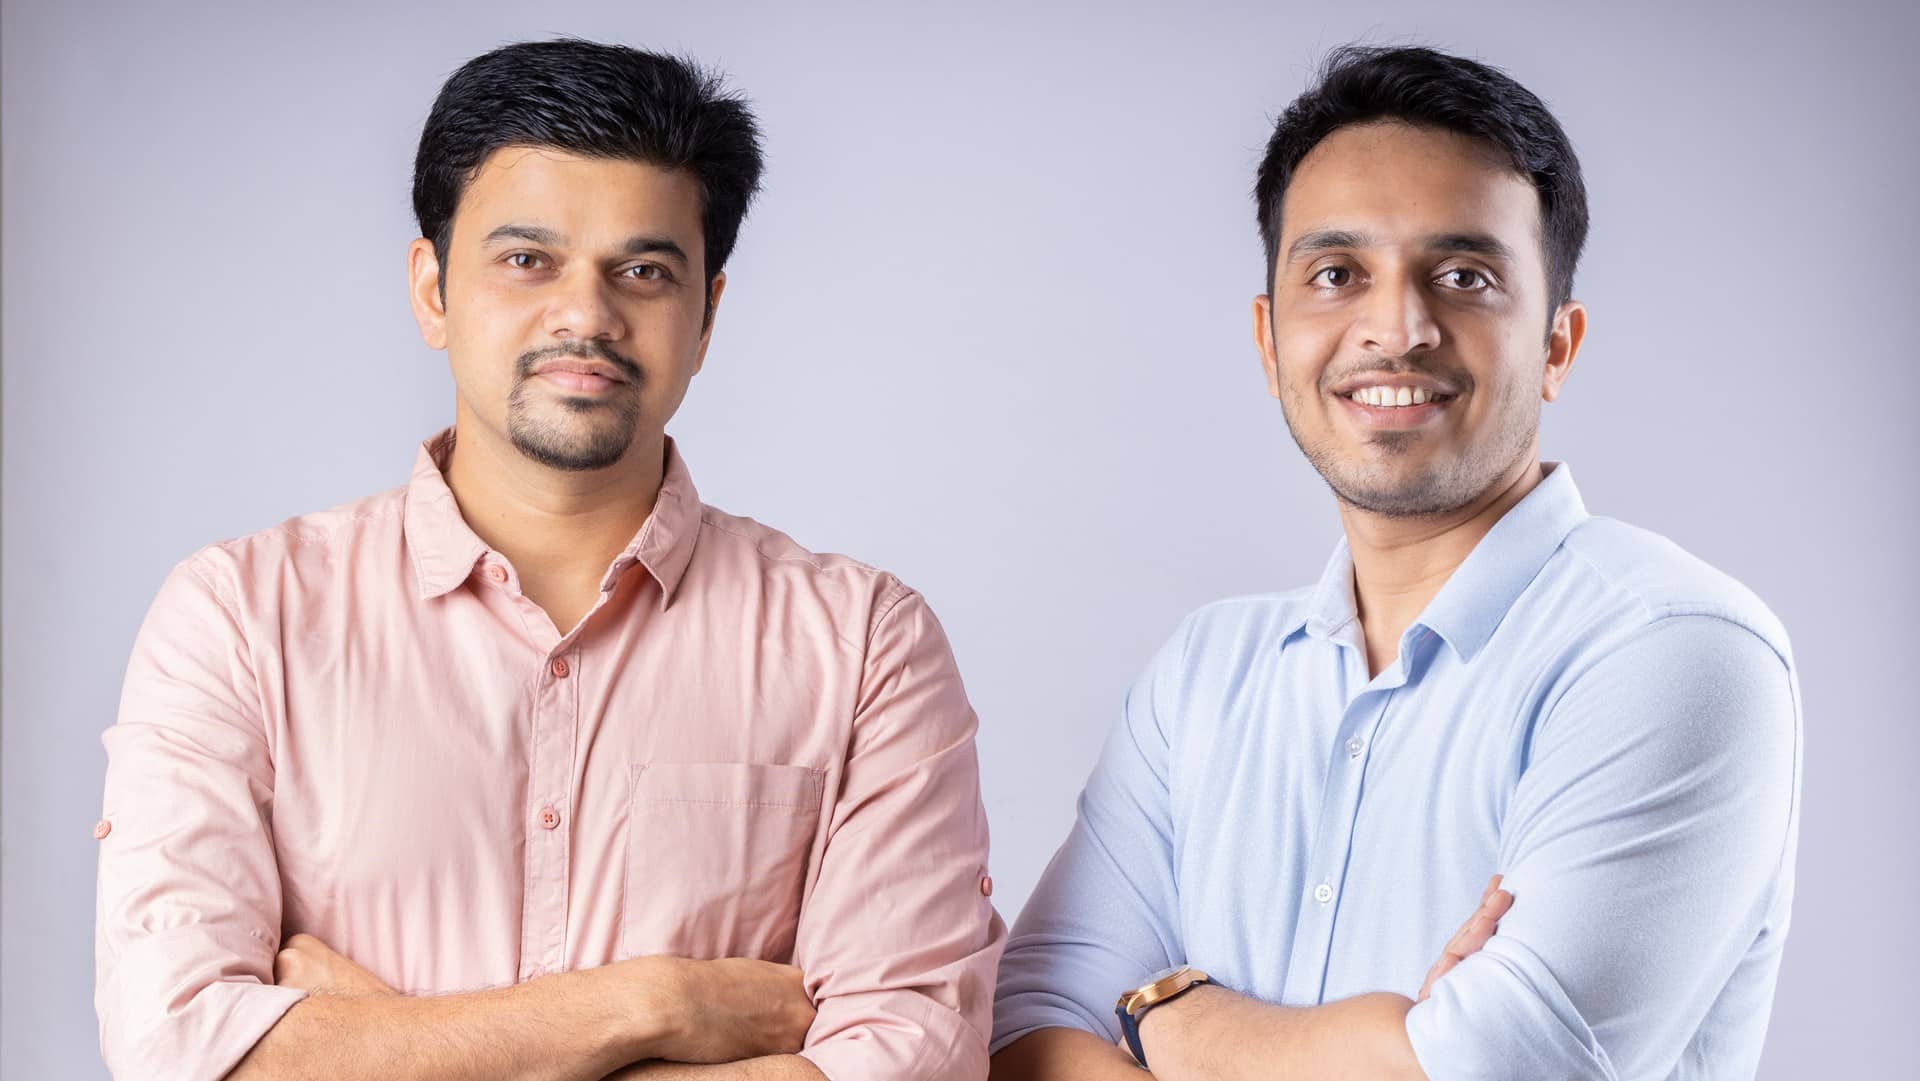 Pune-based startup Gyde raises $ 250,000 in Seed round